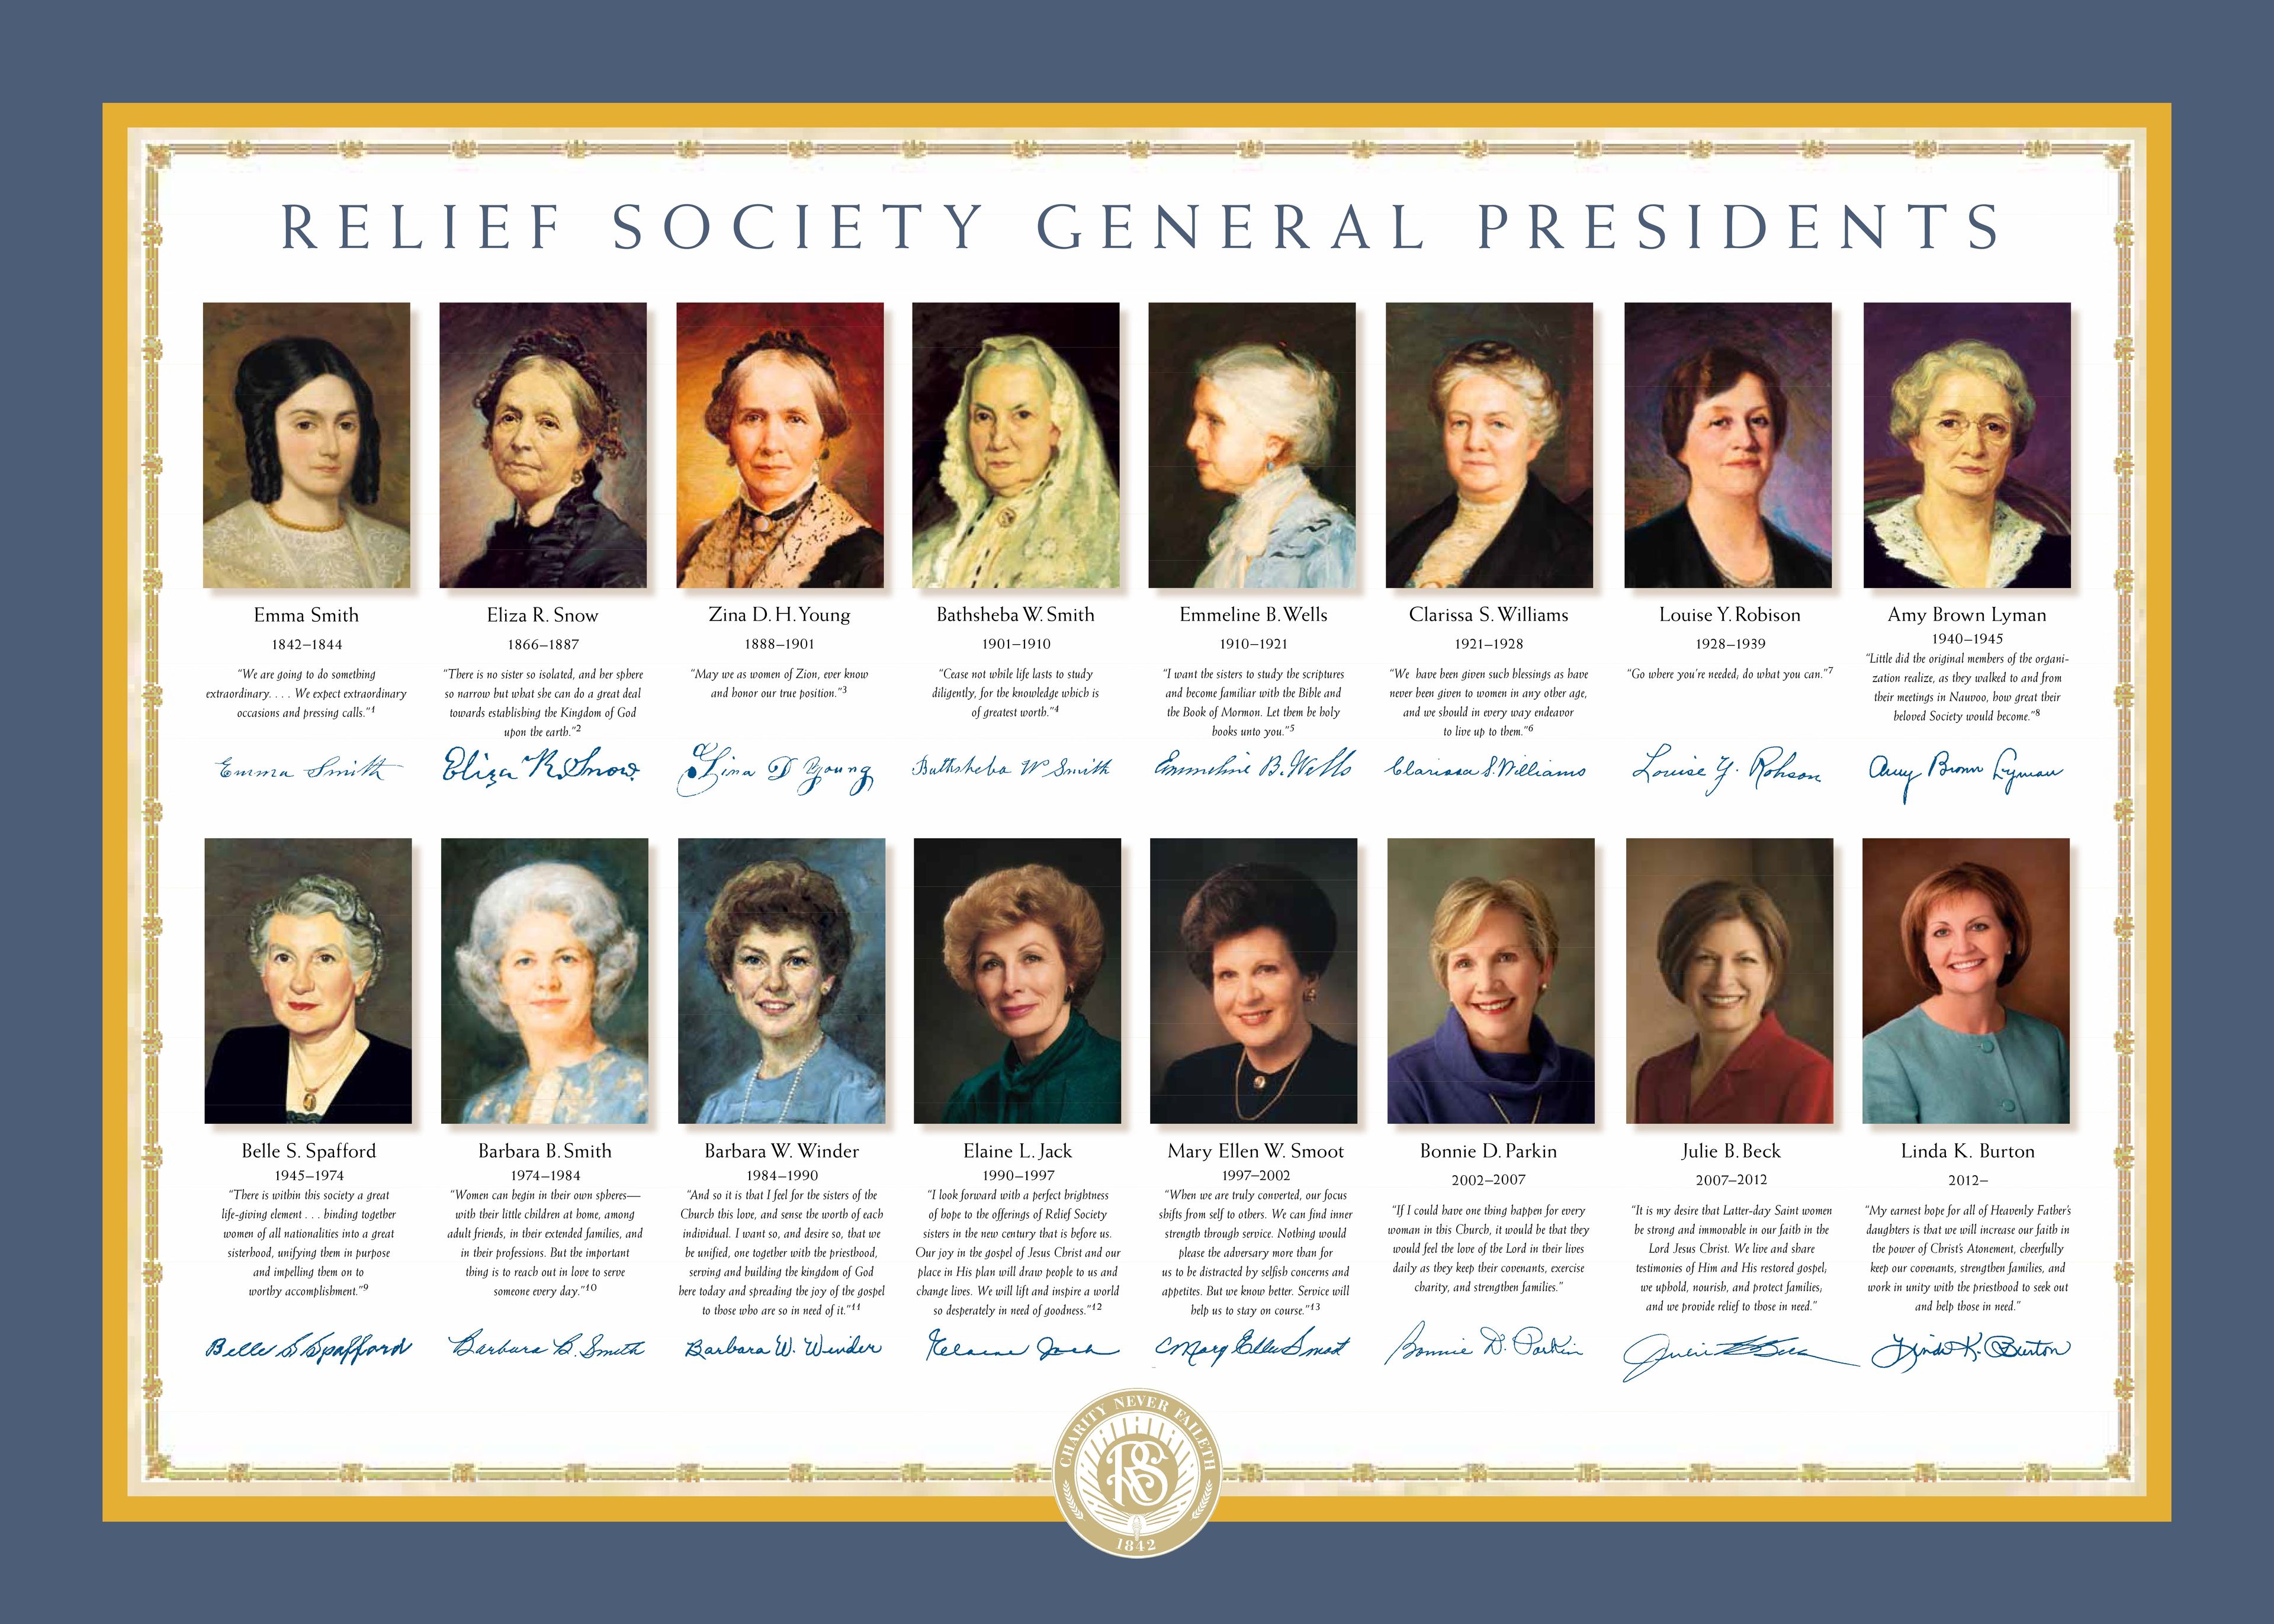 A poster of the Relief Society General Presidents.